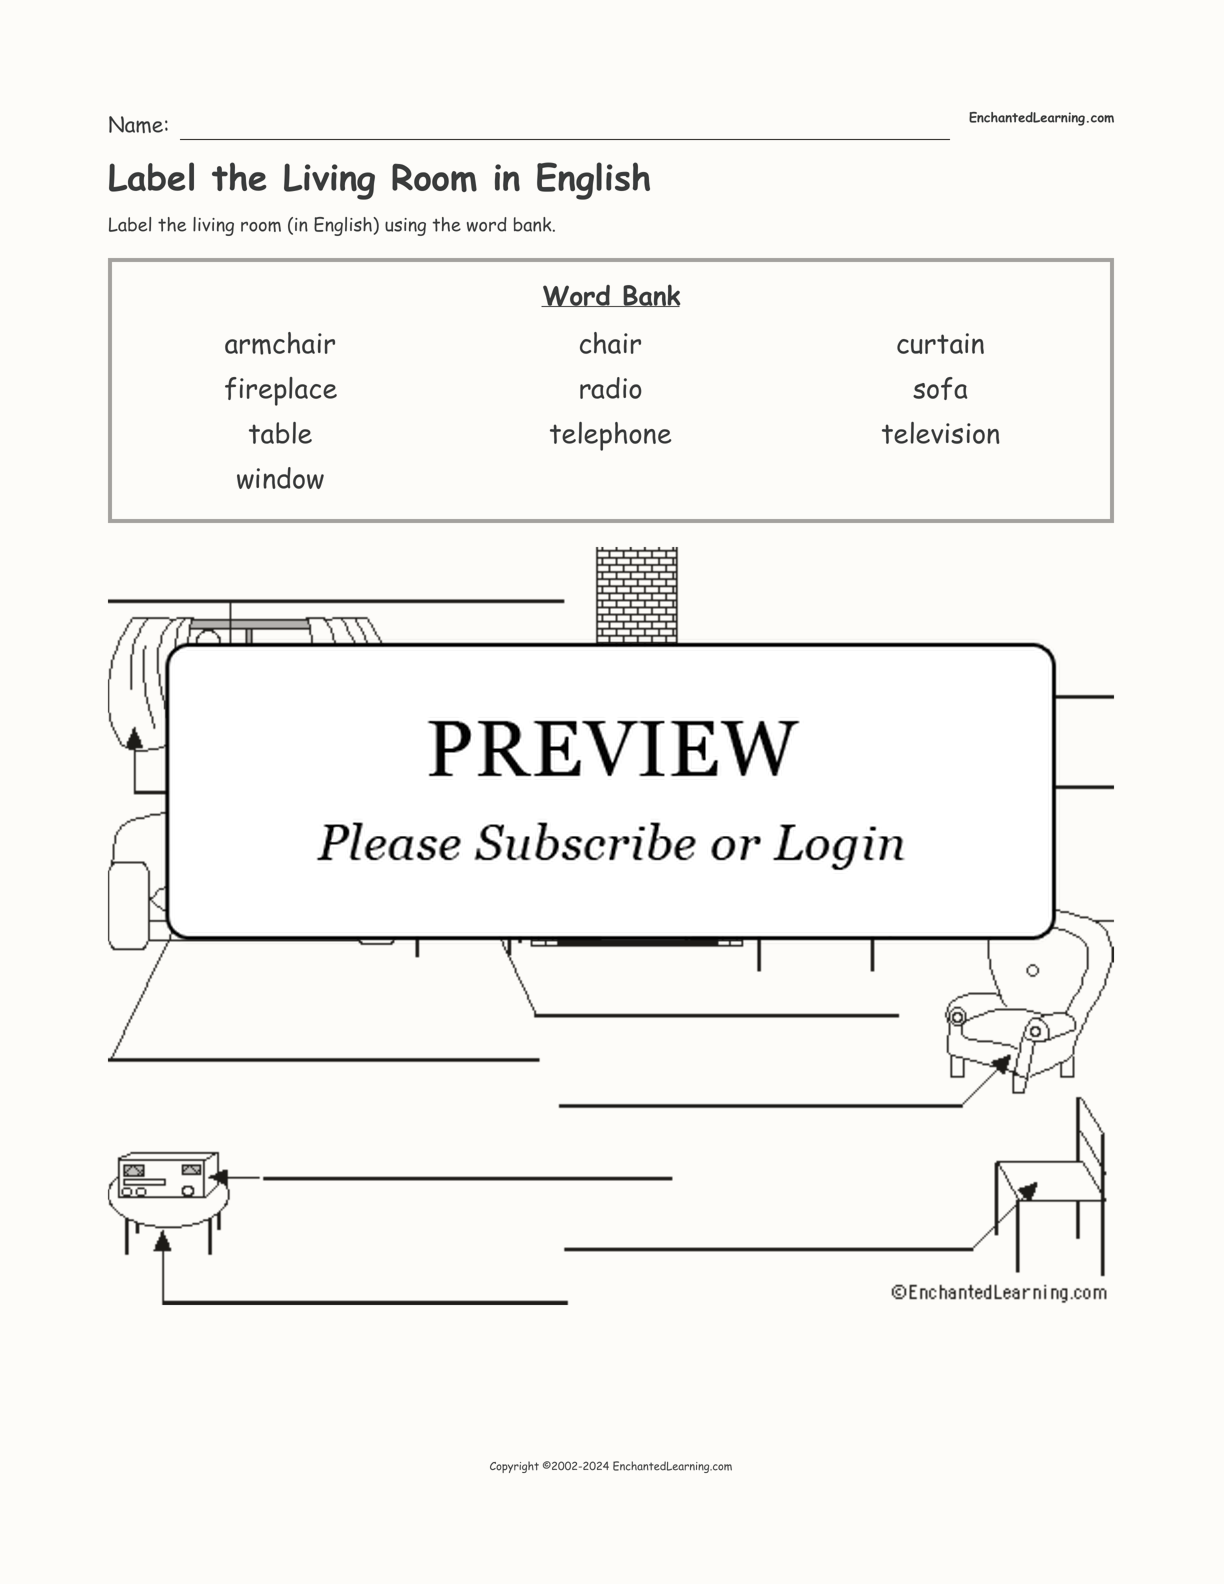 Label the Living Room in English interactive worksheet page 1